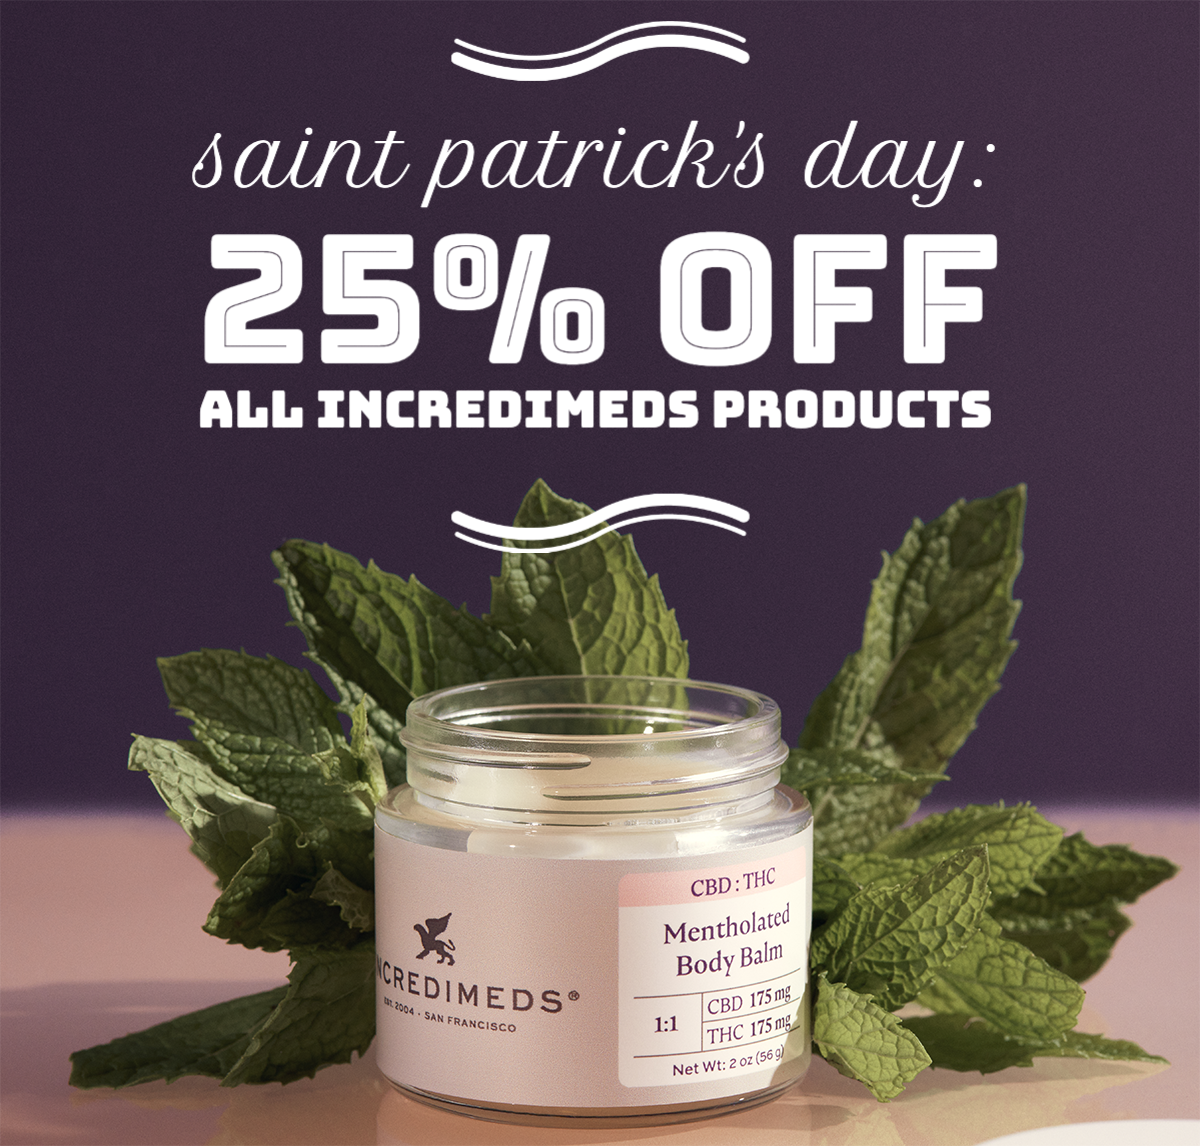 In celebration of Saint Patrick's Day on March 17, all IncrediMeds products are 25% off.